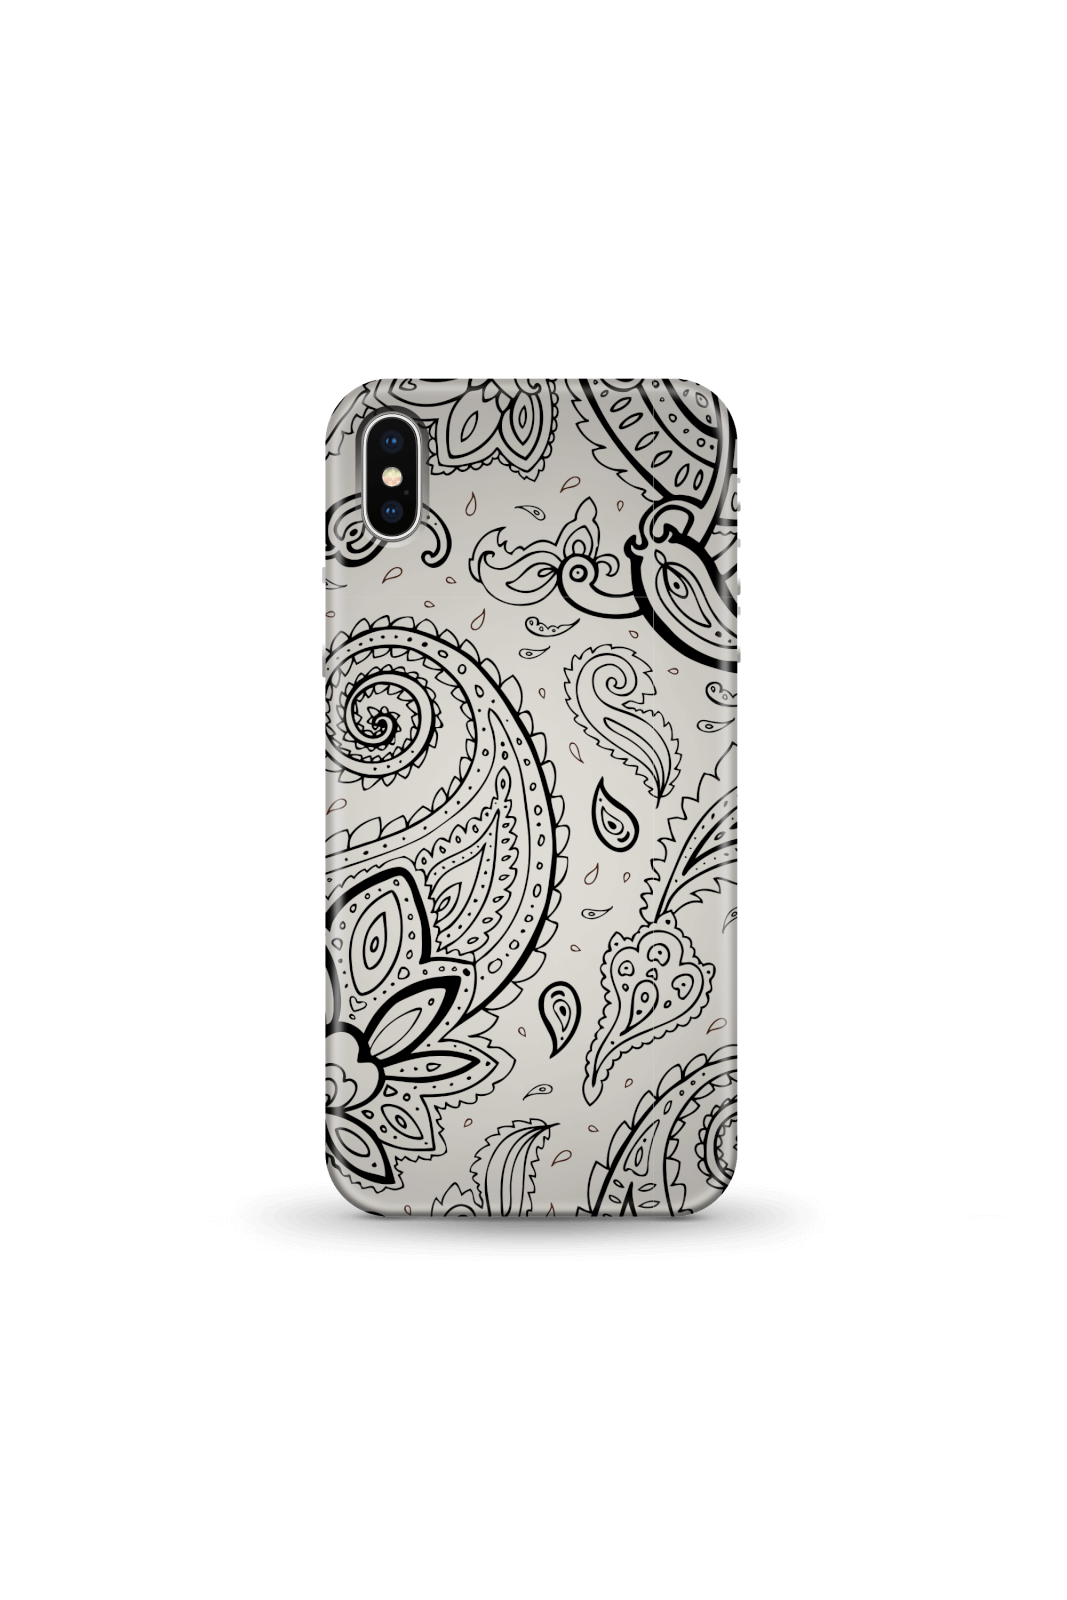 Neutral Paisley Phone Case for iPhone and Android - iPhone 5/5s - Snap Case - Matte